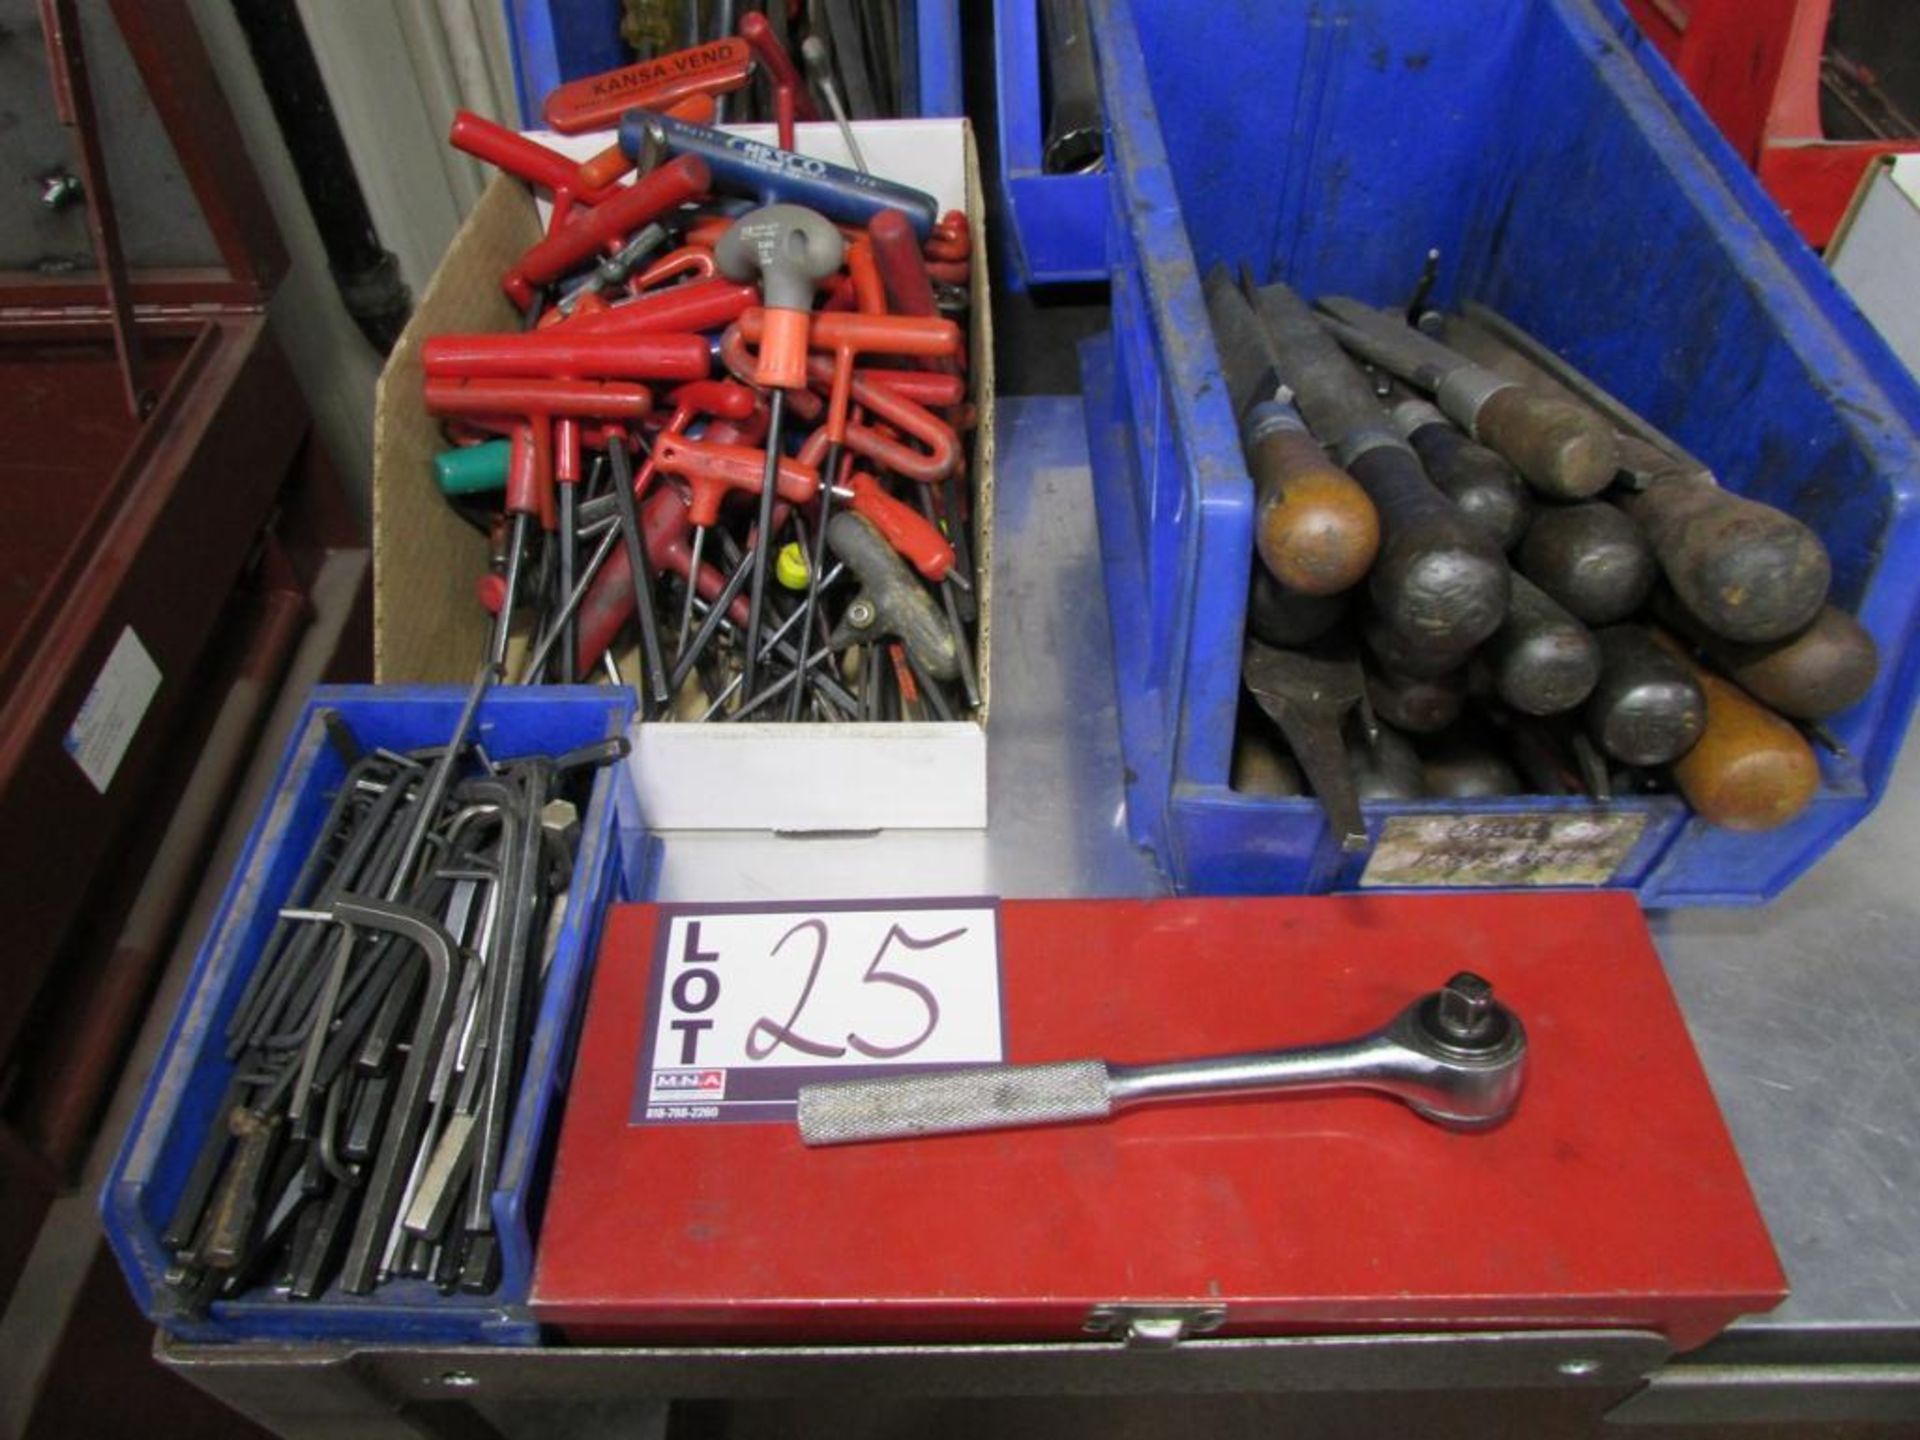 Assorted Hand Tools: Wrenches, Drivers, Files, Allen Wrenches, Ratchet, and Socket Set - Image 3 of 4